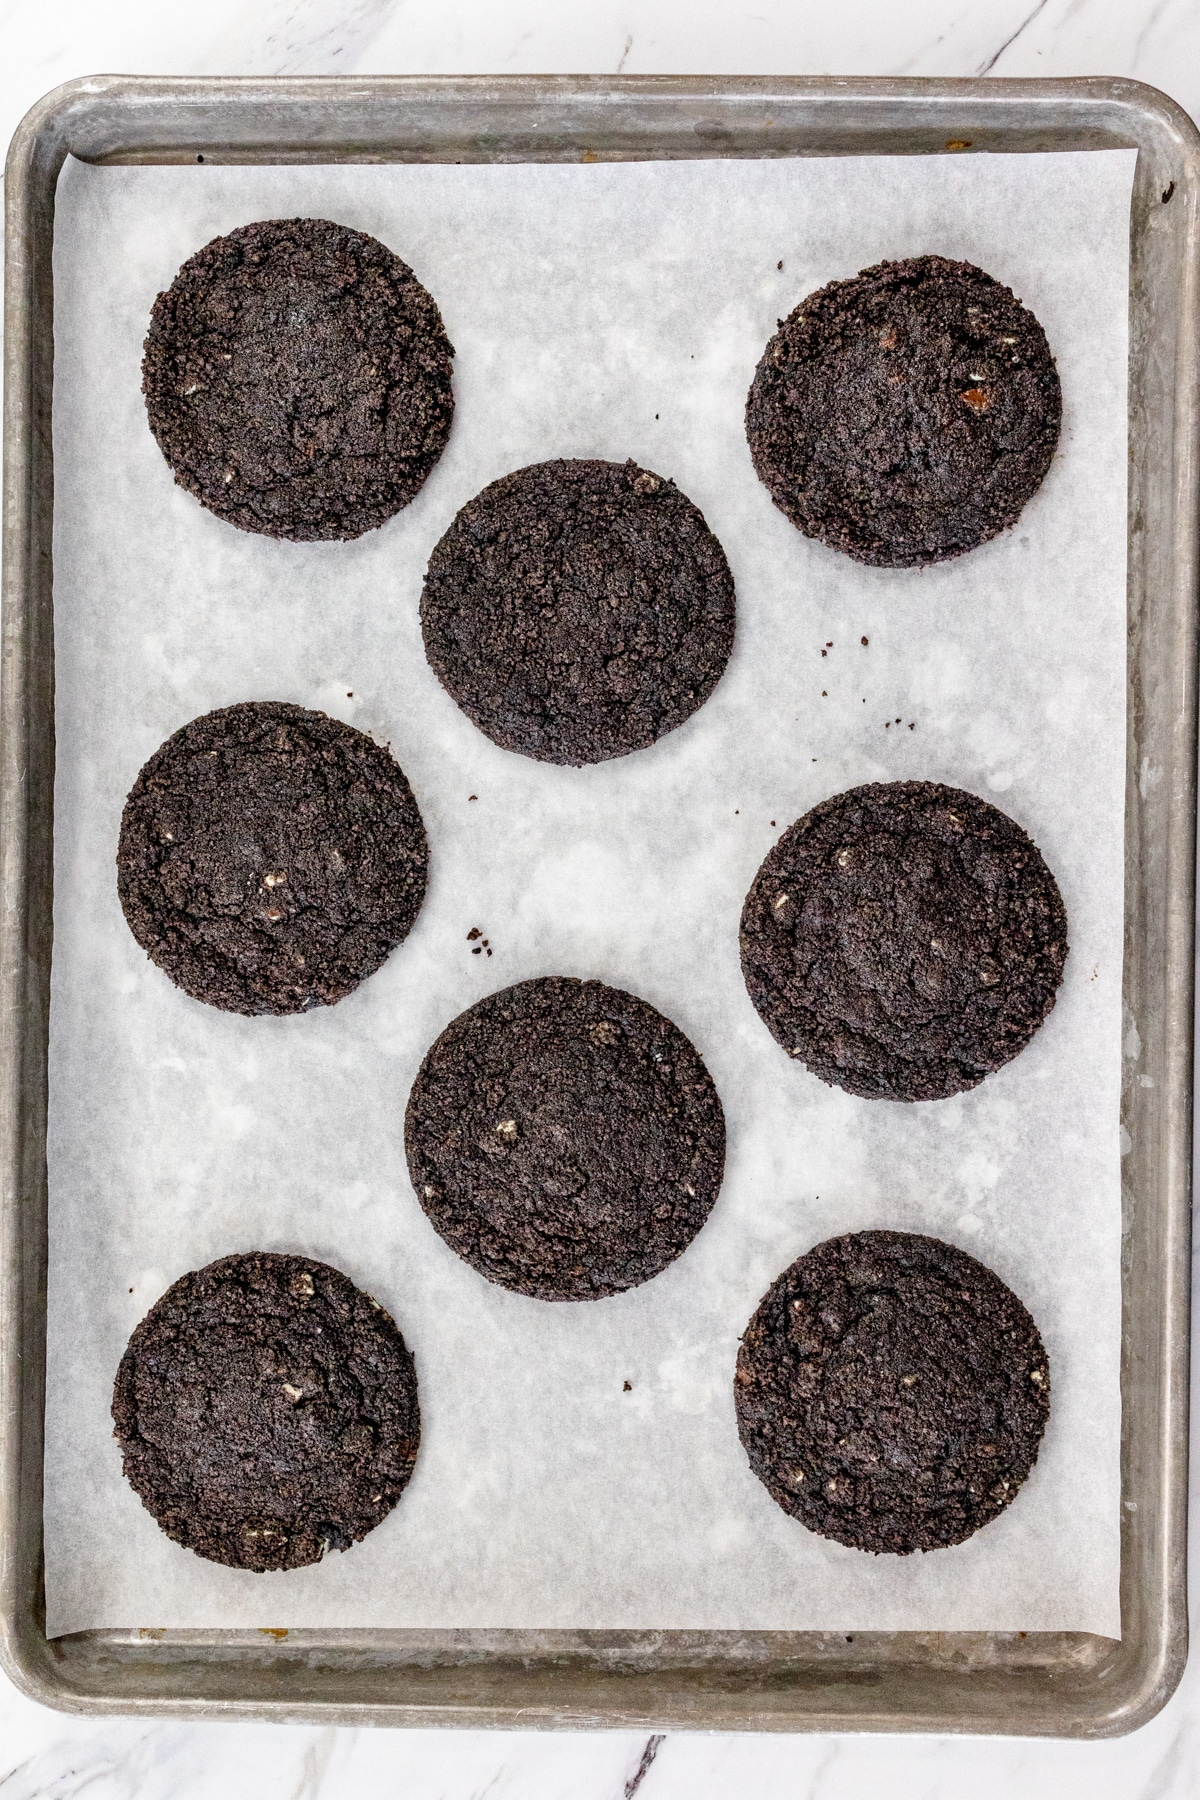 Top view of baking tray lined with parchment paper with freshly baked Frosted Mint Oreo Cookies on it.